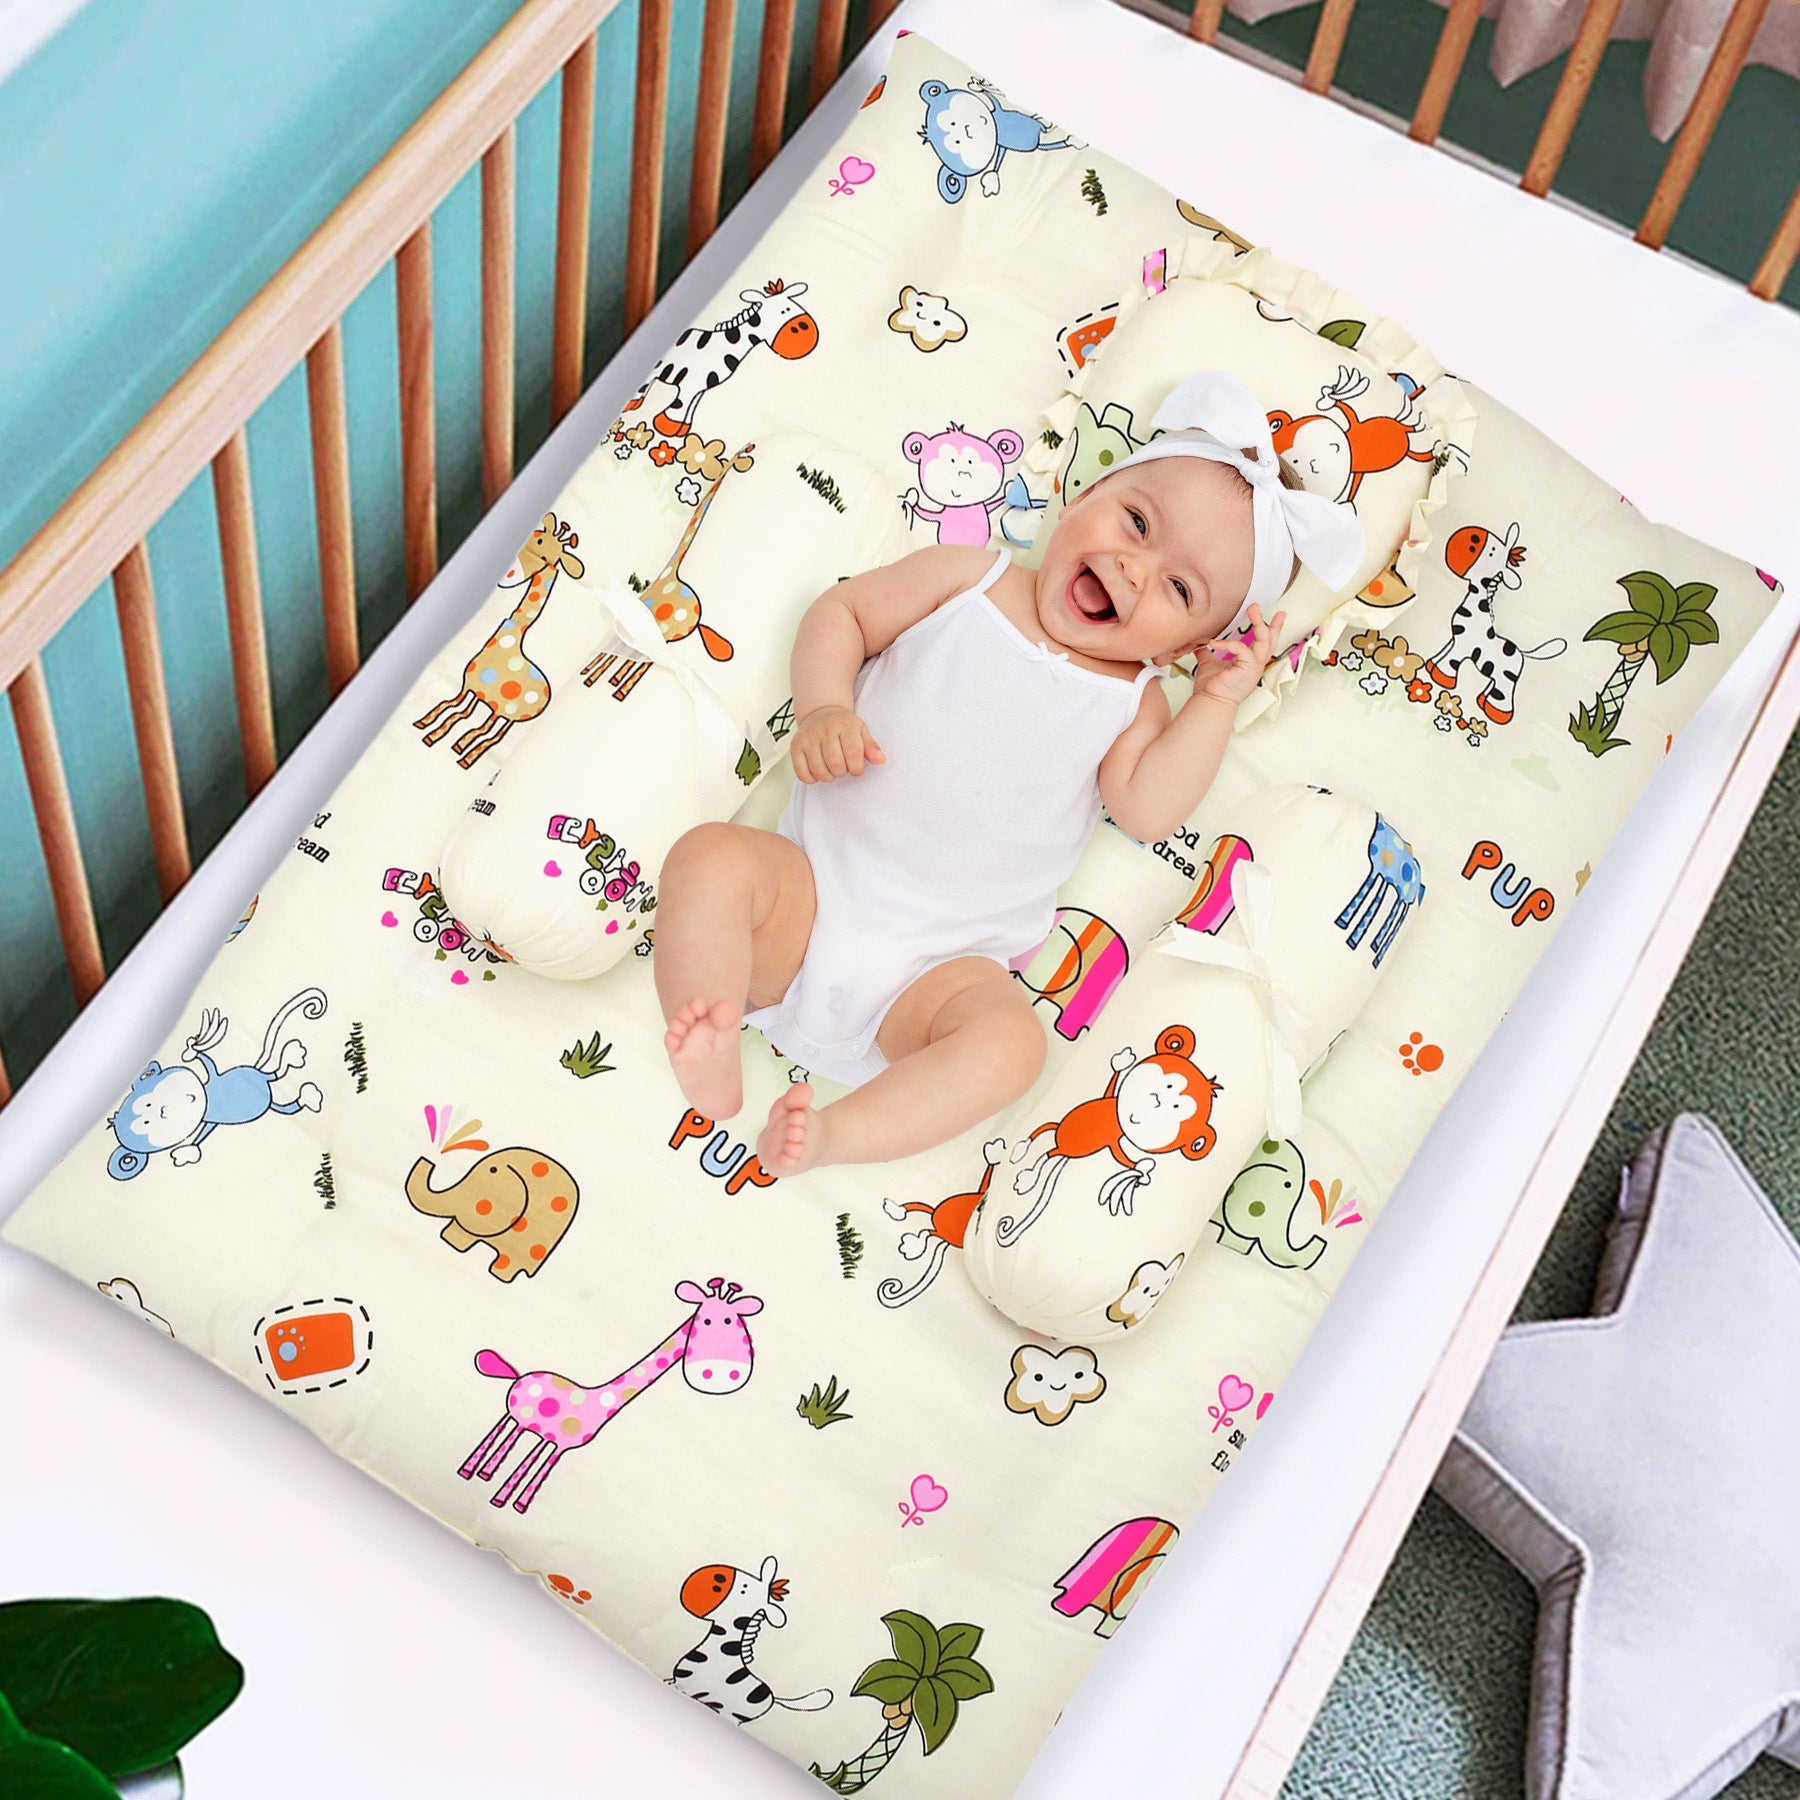 Mattress Set With Neck Pillow and Bolsters I Love Animals Cream - Baby Moo